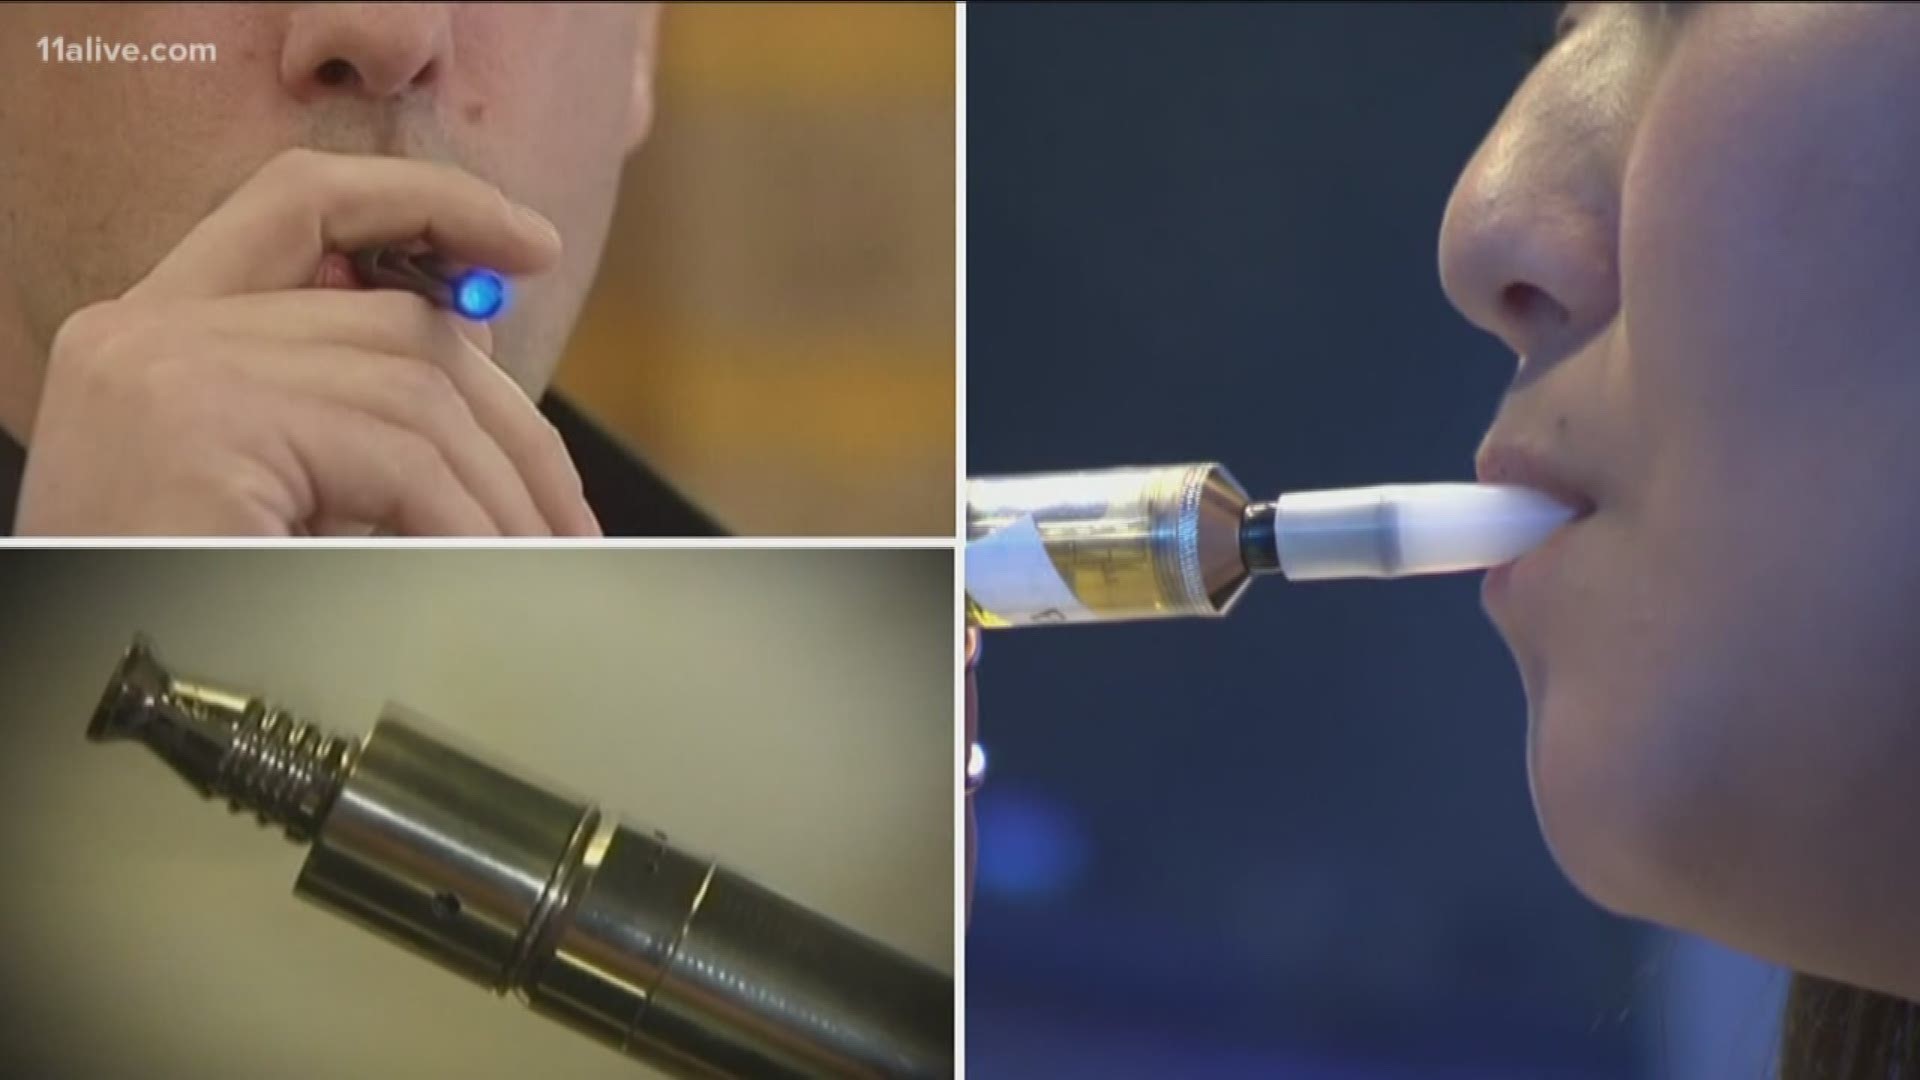 Medical experts are worried that the new trends would lead young people back to smoking.